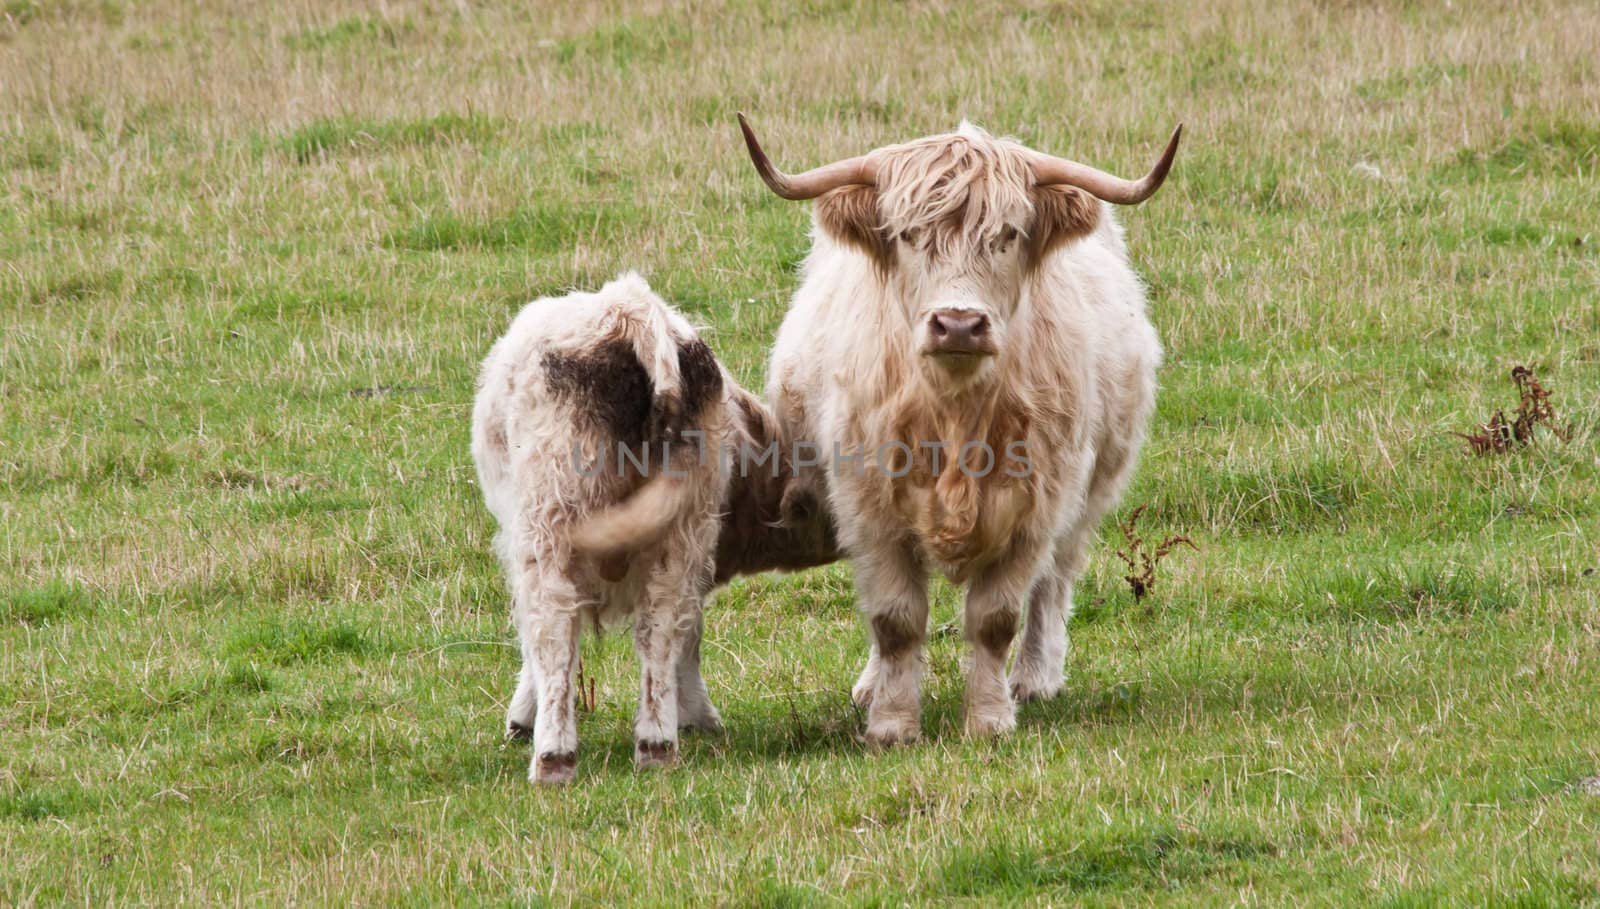 Angus calf withi his mother, Scotland, Sutherland